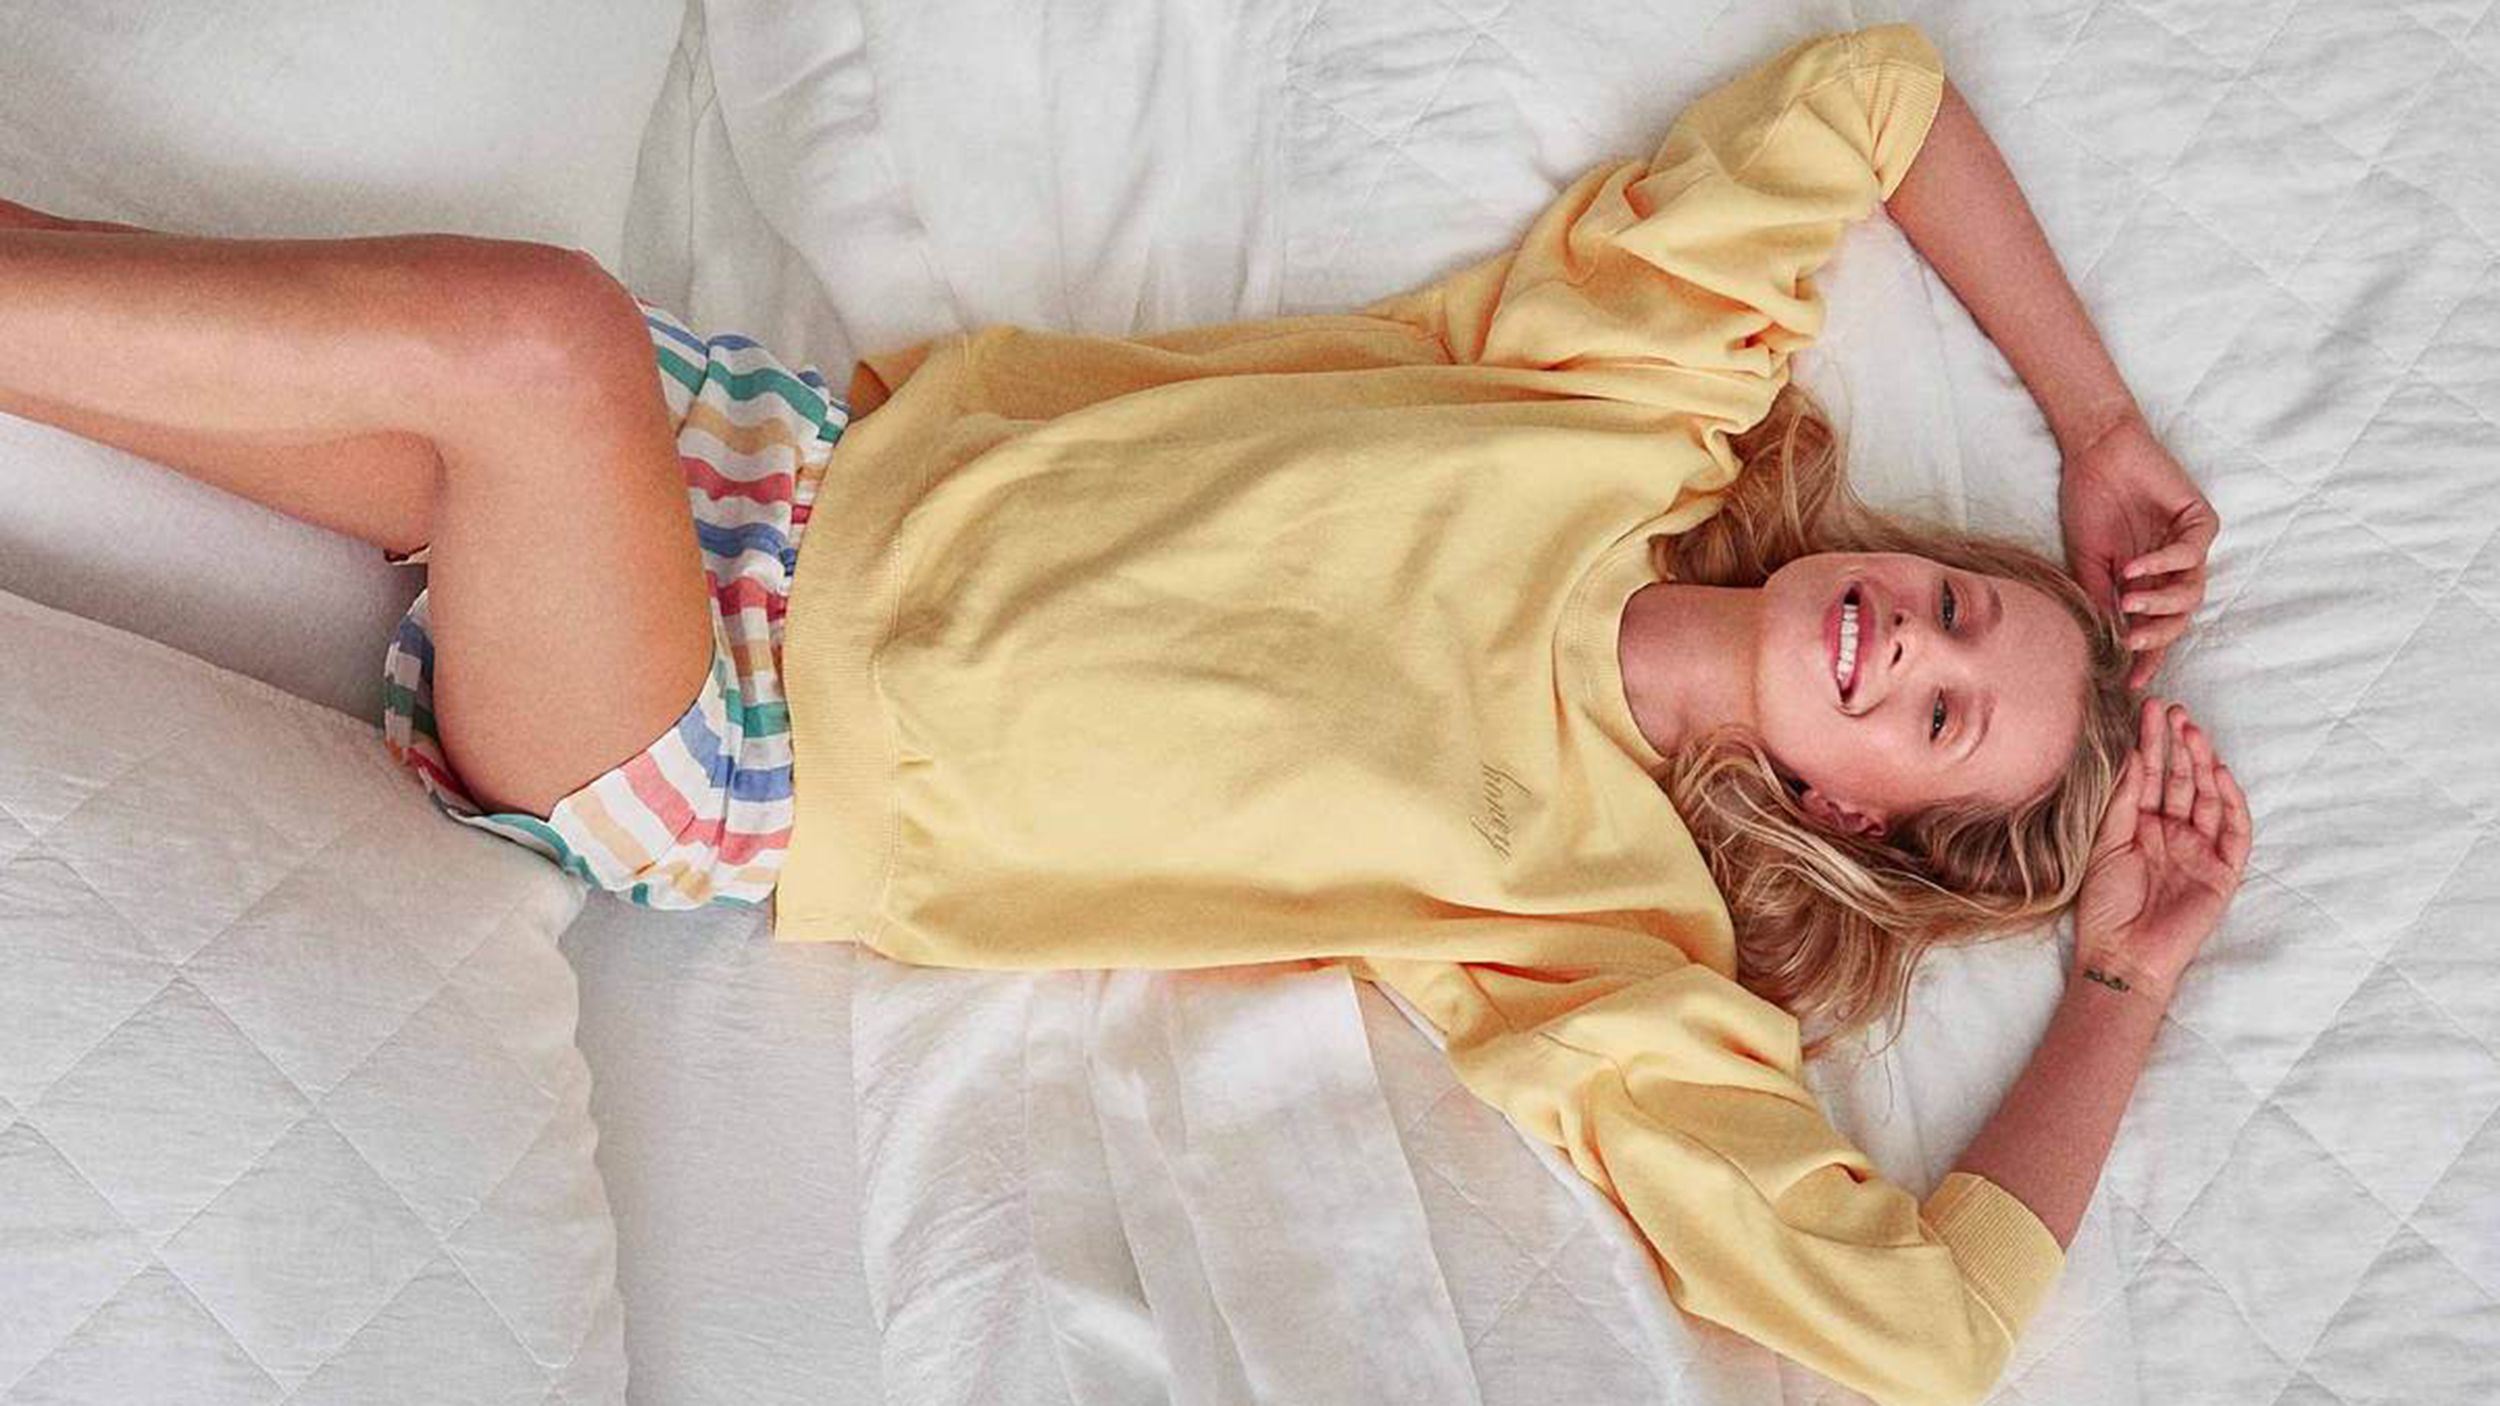 Hot sleeper? Here are 21 products that can keep you cool | CNN Underscored